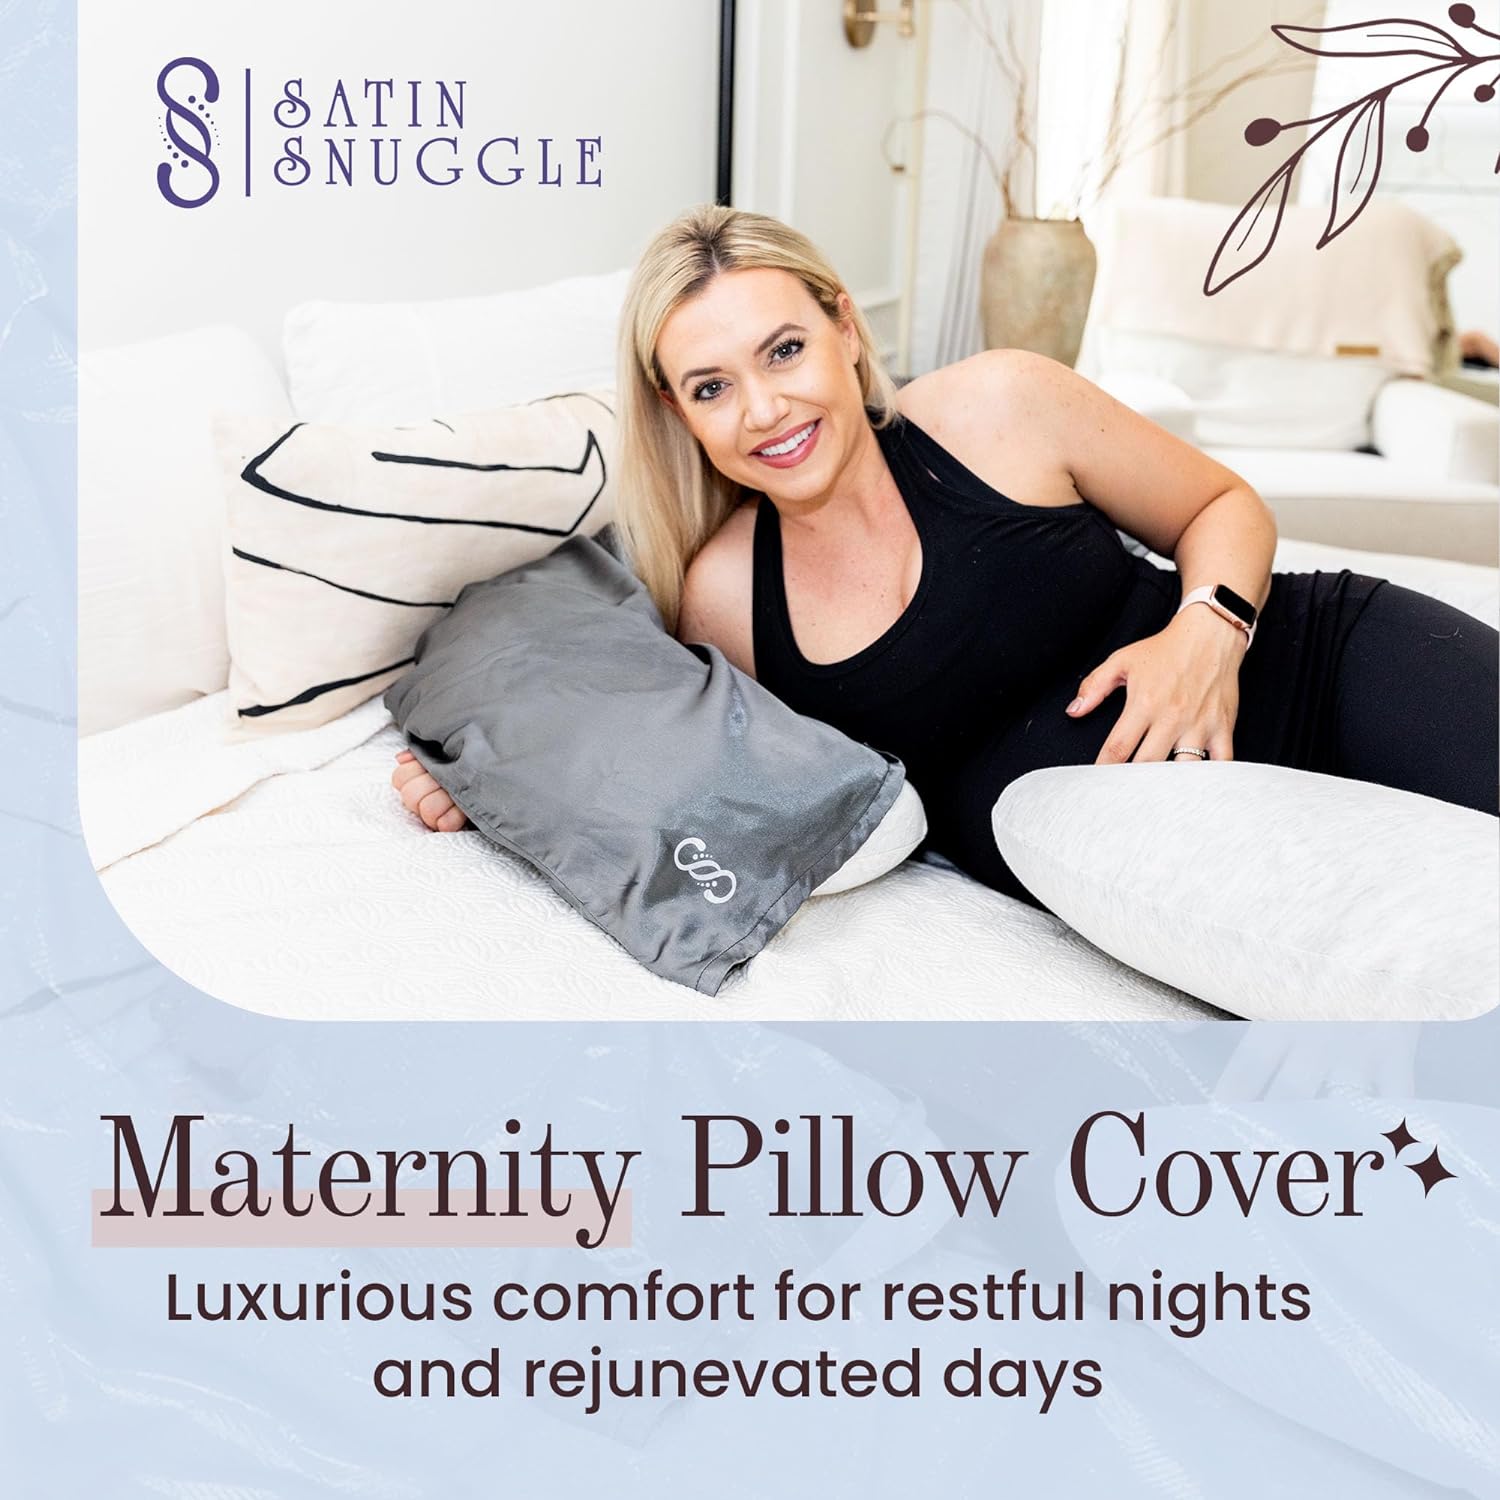 Satin Snuggle Pregnancy Pillow Cover Review